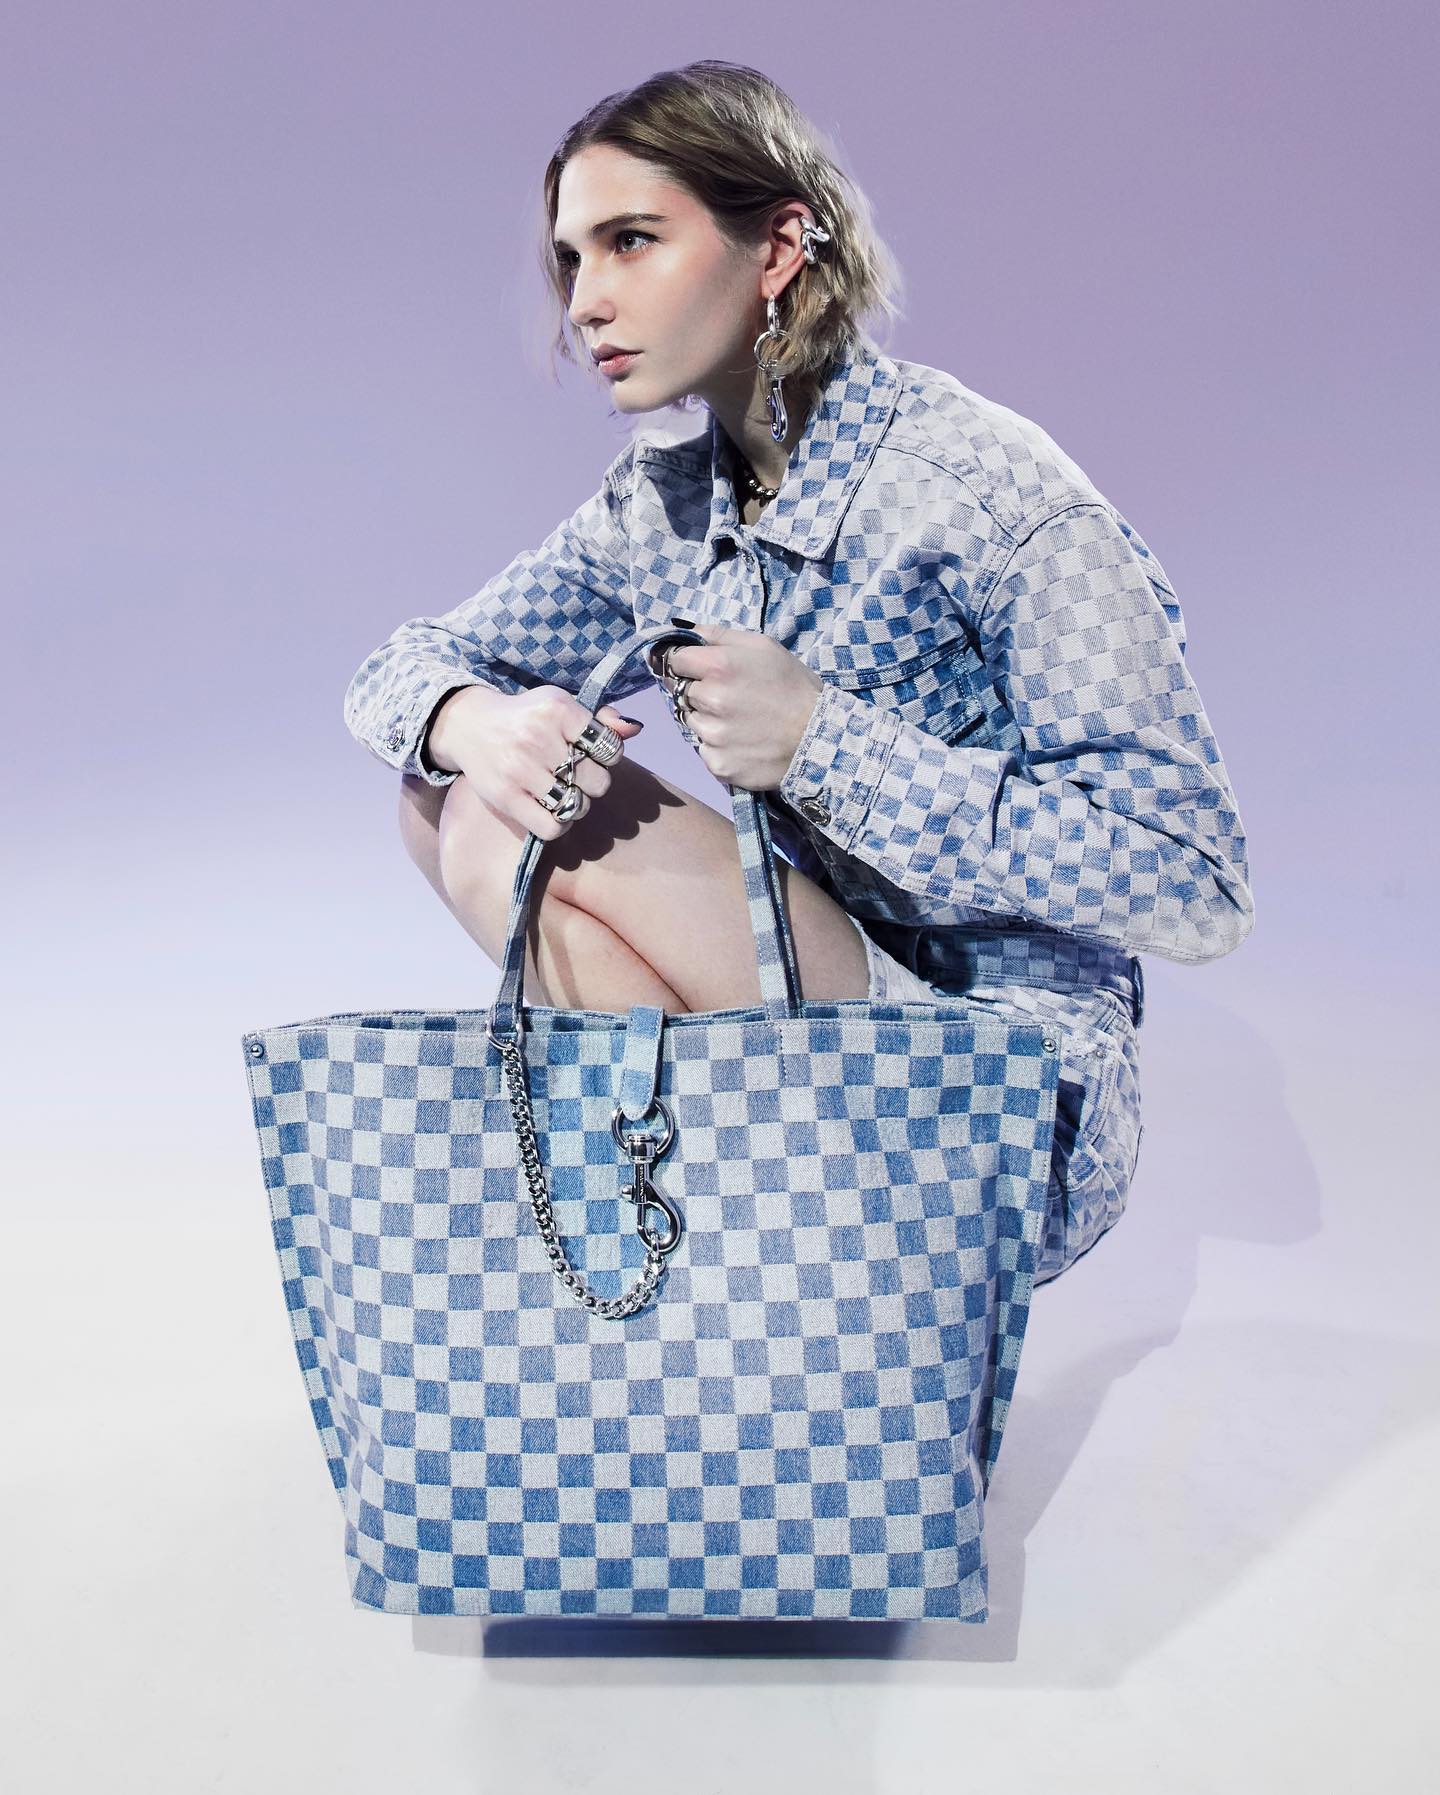 A woman is bending down and holding a blue checkered purse from Rebecca Minkoff. Her jacket matches the bag.